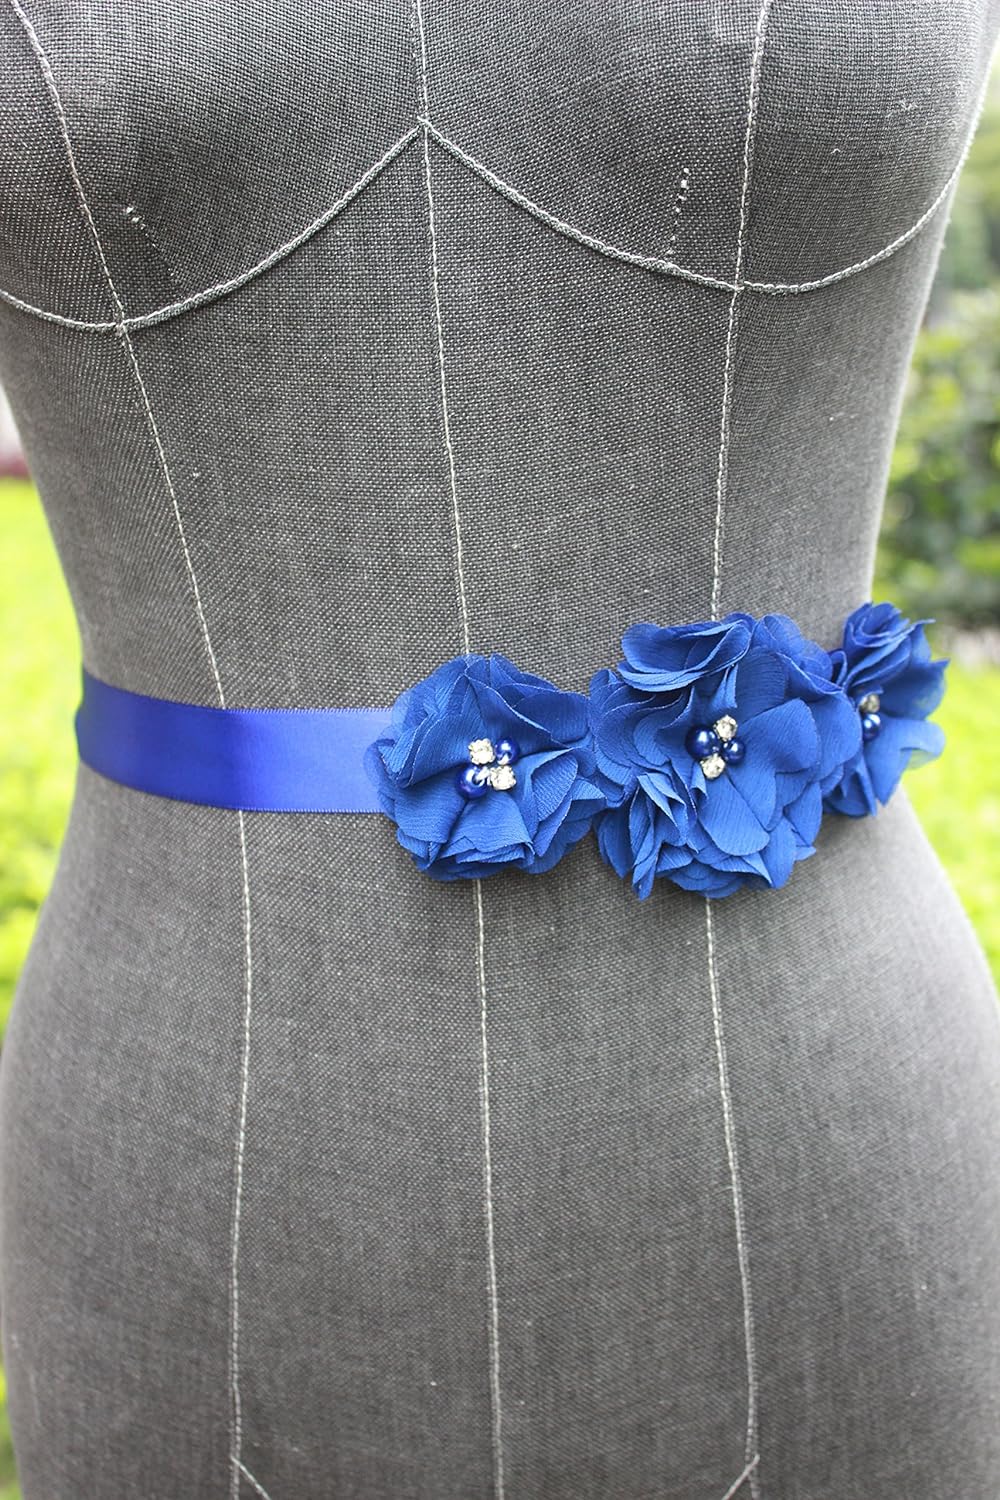 Add Elegance and Charm to Your Wedding with Nania Bridesmaid and Flowergirls Sashes